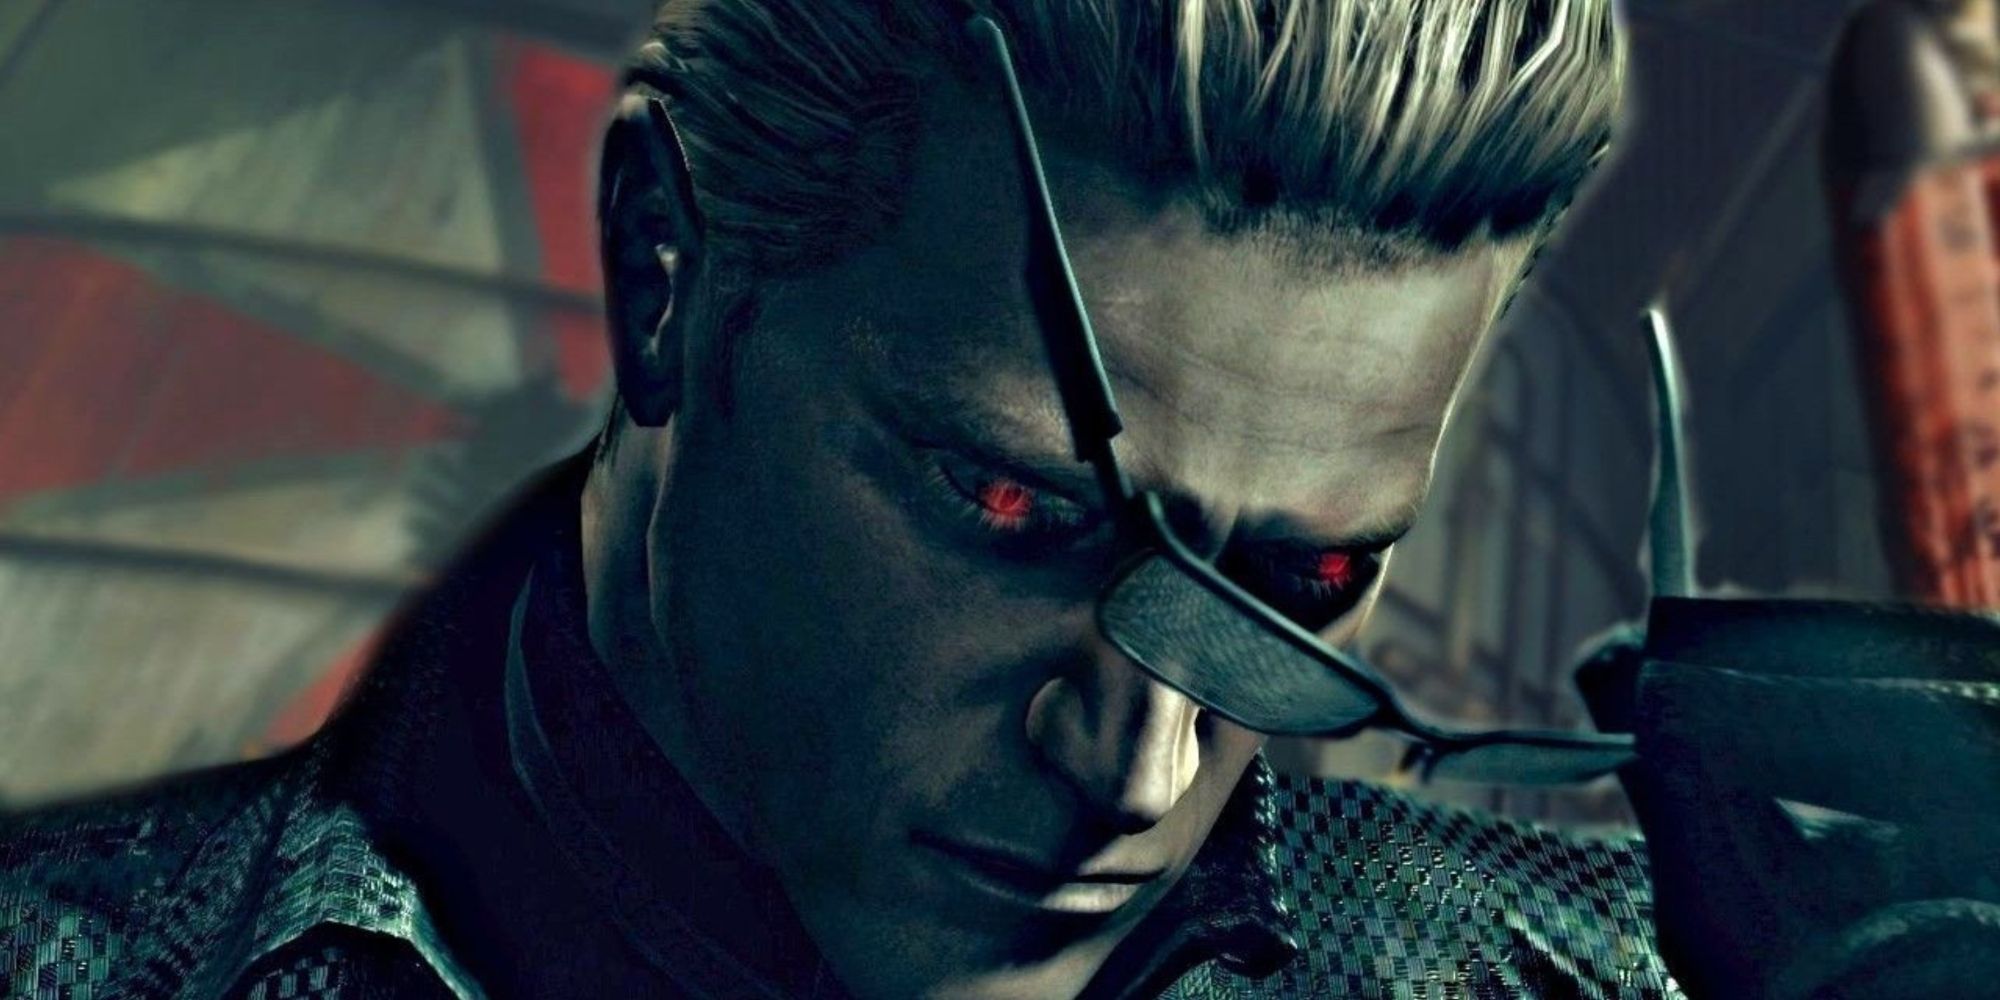 Wesker Removing His Sunglasses to Reveal His Red Eyes